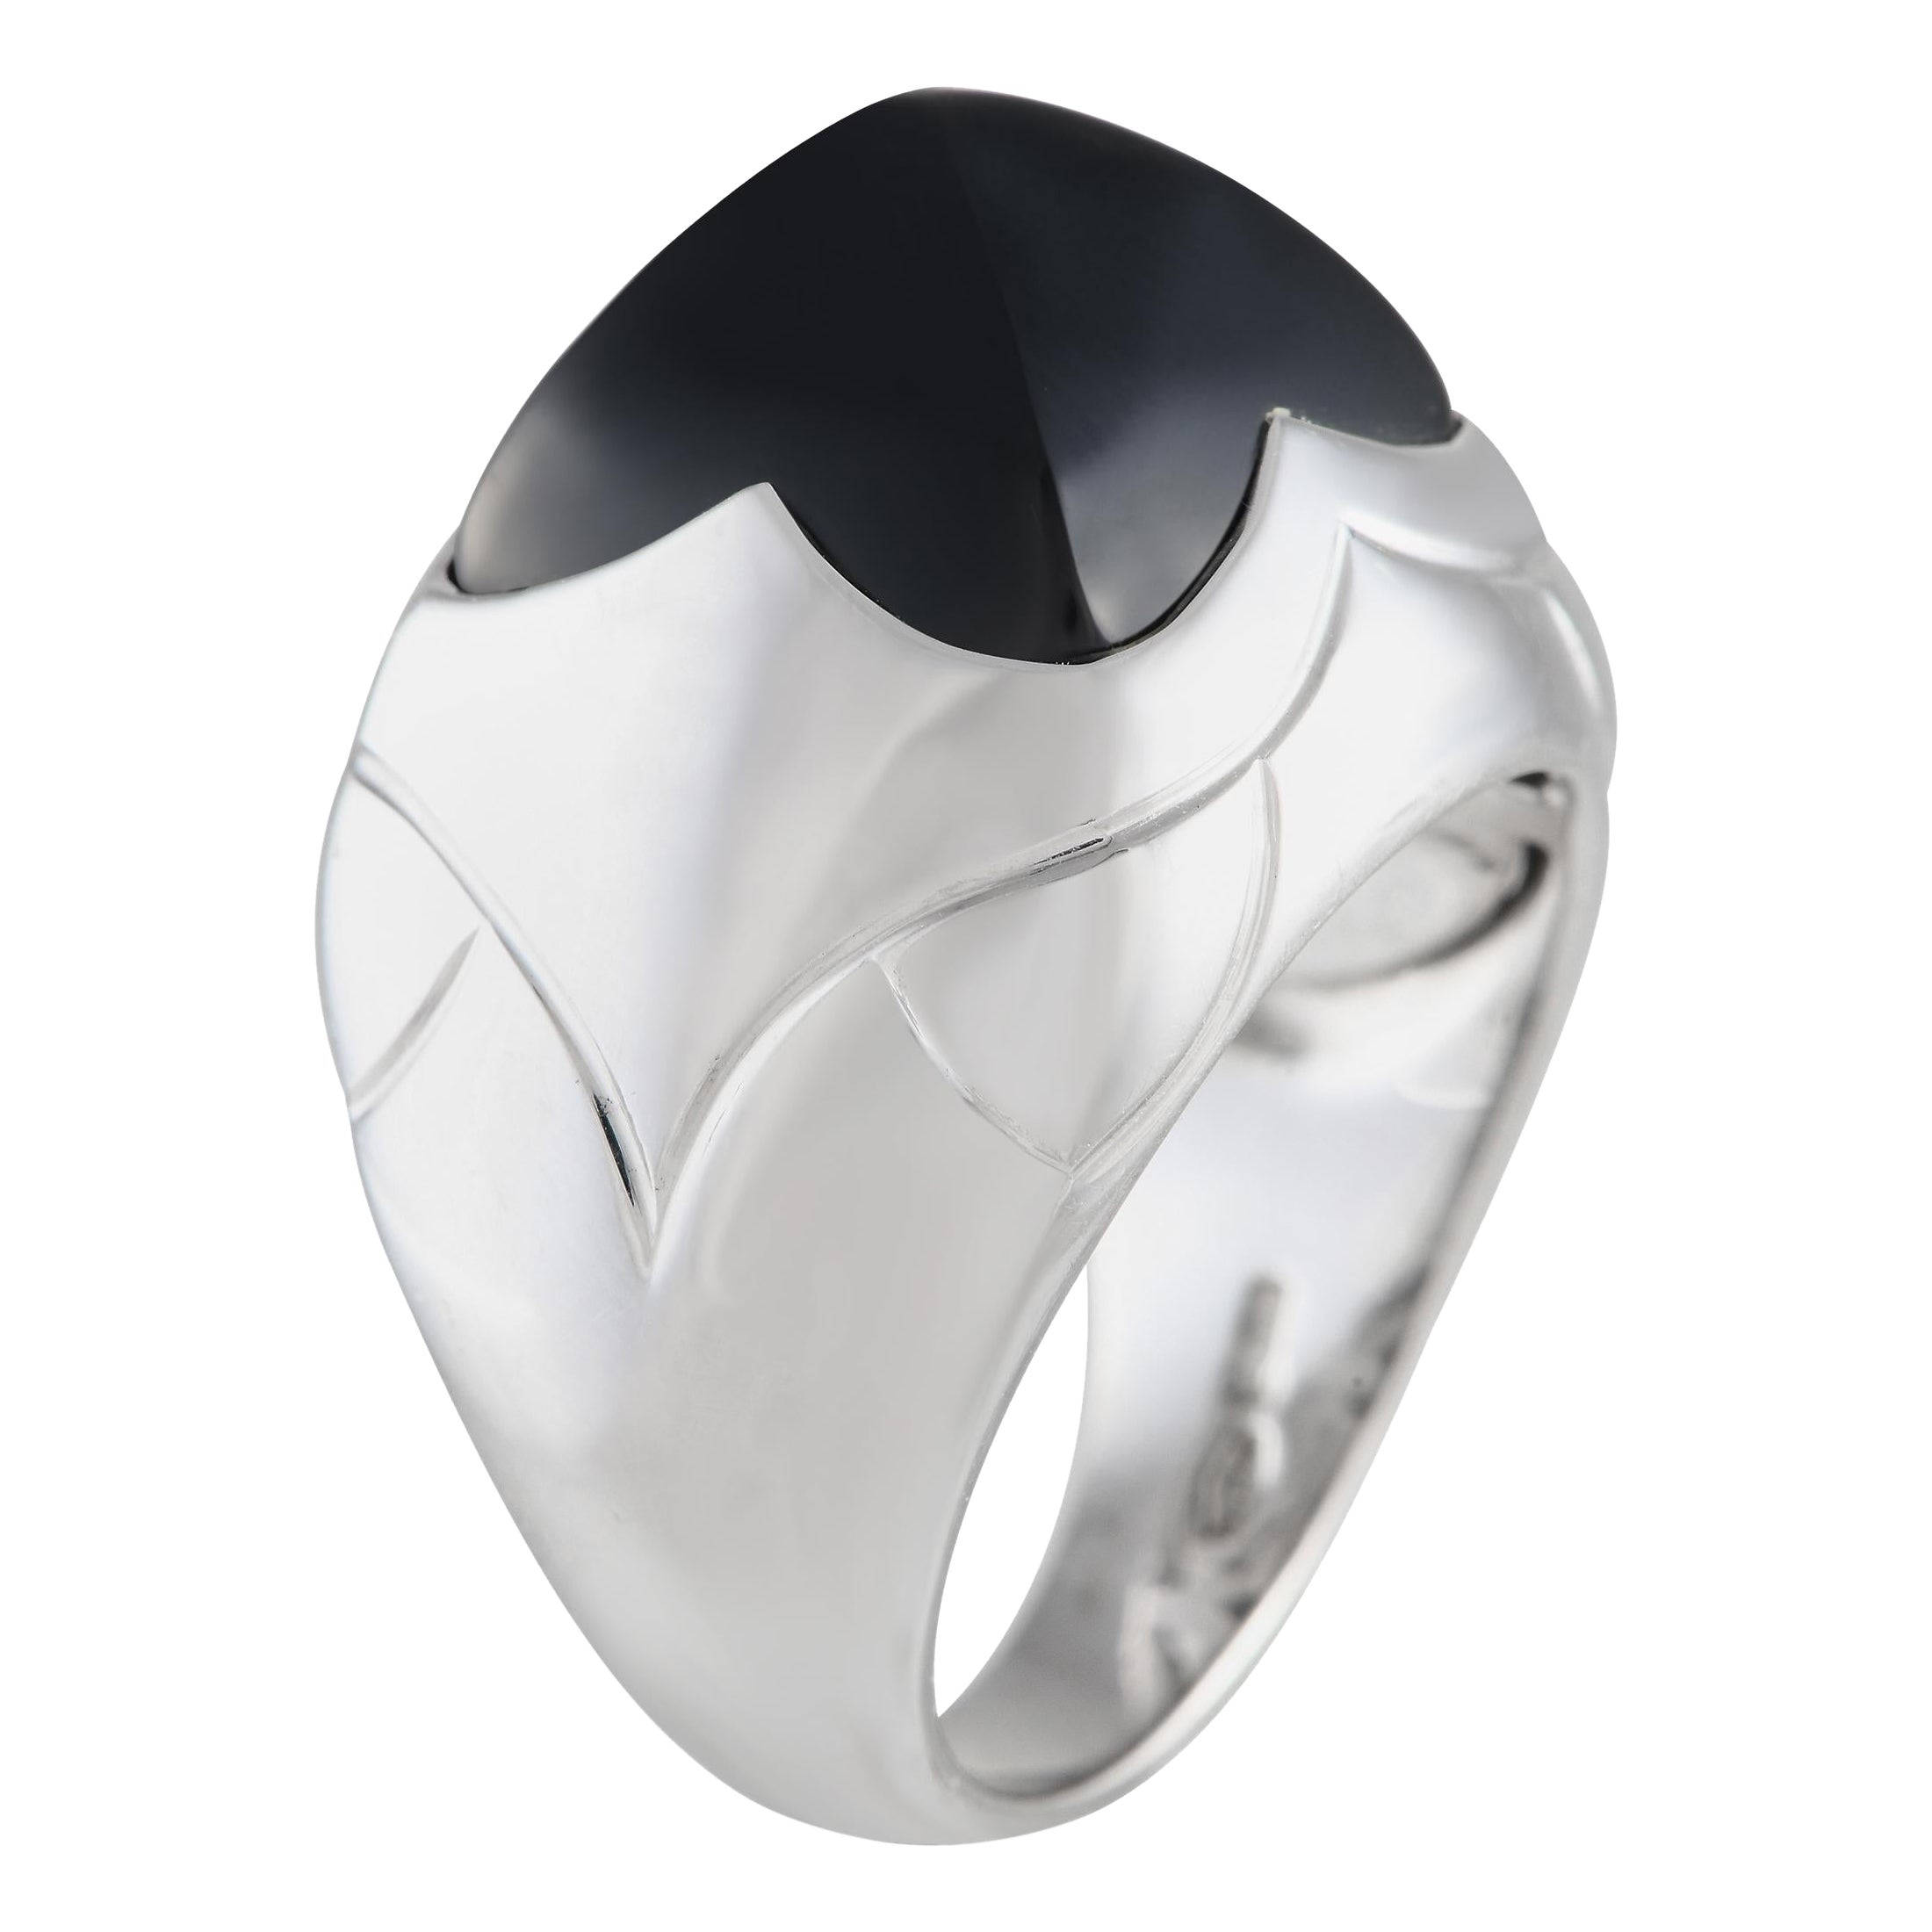 This is a unique piece of high-jewelry from Bvlgari that was created in the 80s. The ring has a geometric profile and is made of 18K white gold. The band of the ring widens towards the top to highlight a black onyx cabochon in a sugarloaf cut. This